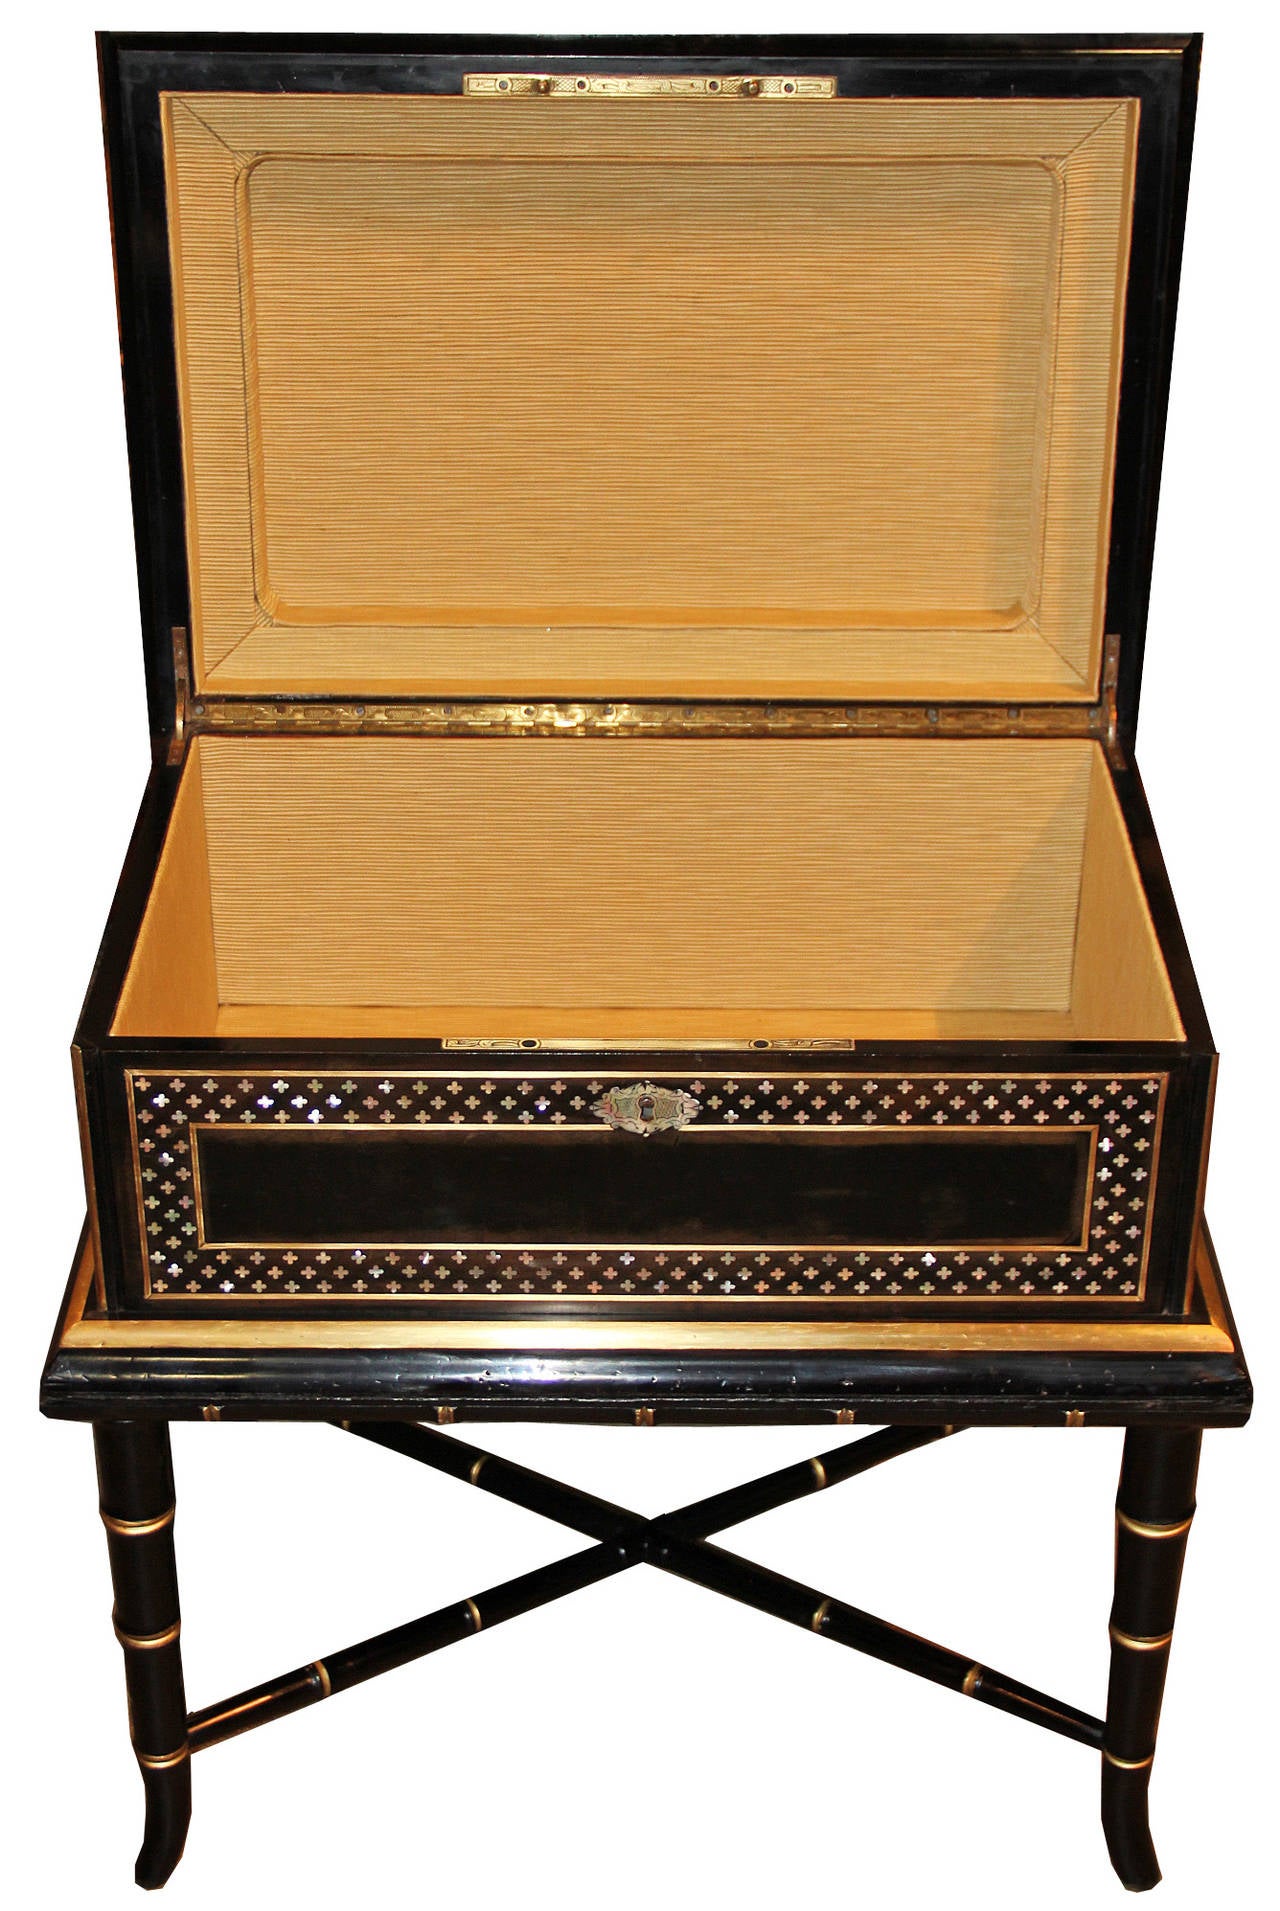 A 19th century Anglo-Indian ebonized box on stand, the top centered by mother-of-pearl and rocaille brass inlay, framed by a mother-of-pearl quatrefoil inlay and brass trim, continuing along the sides, with a mother-of-pearl escutcheon at the front